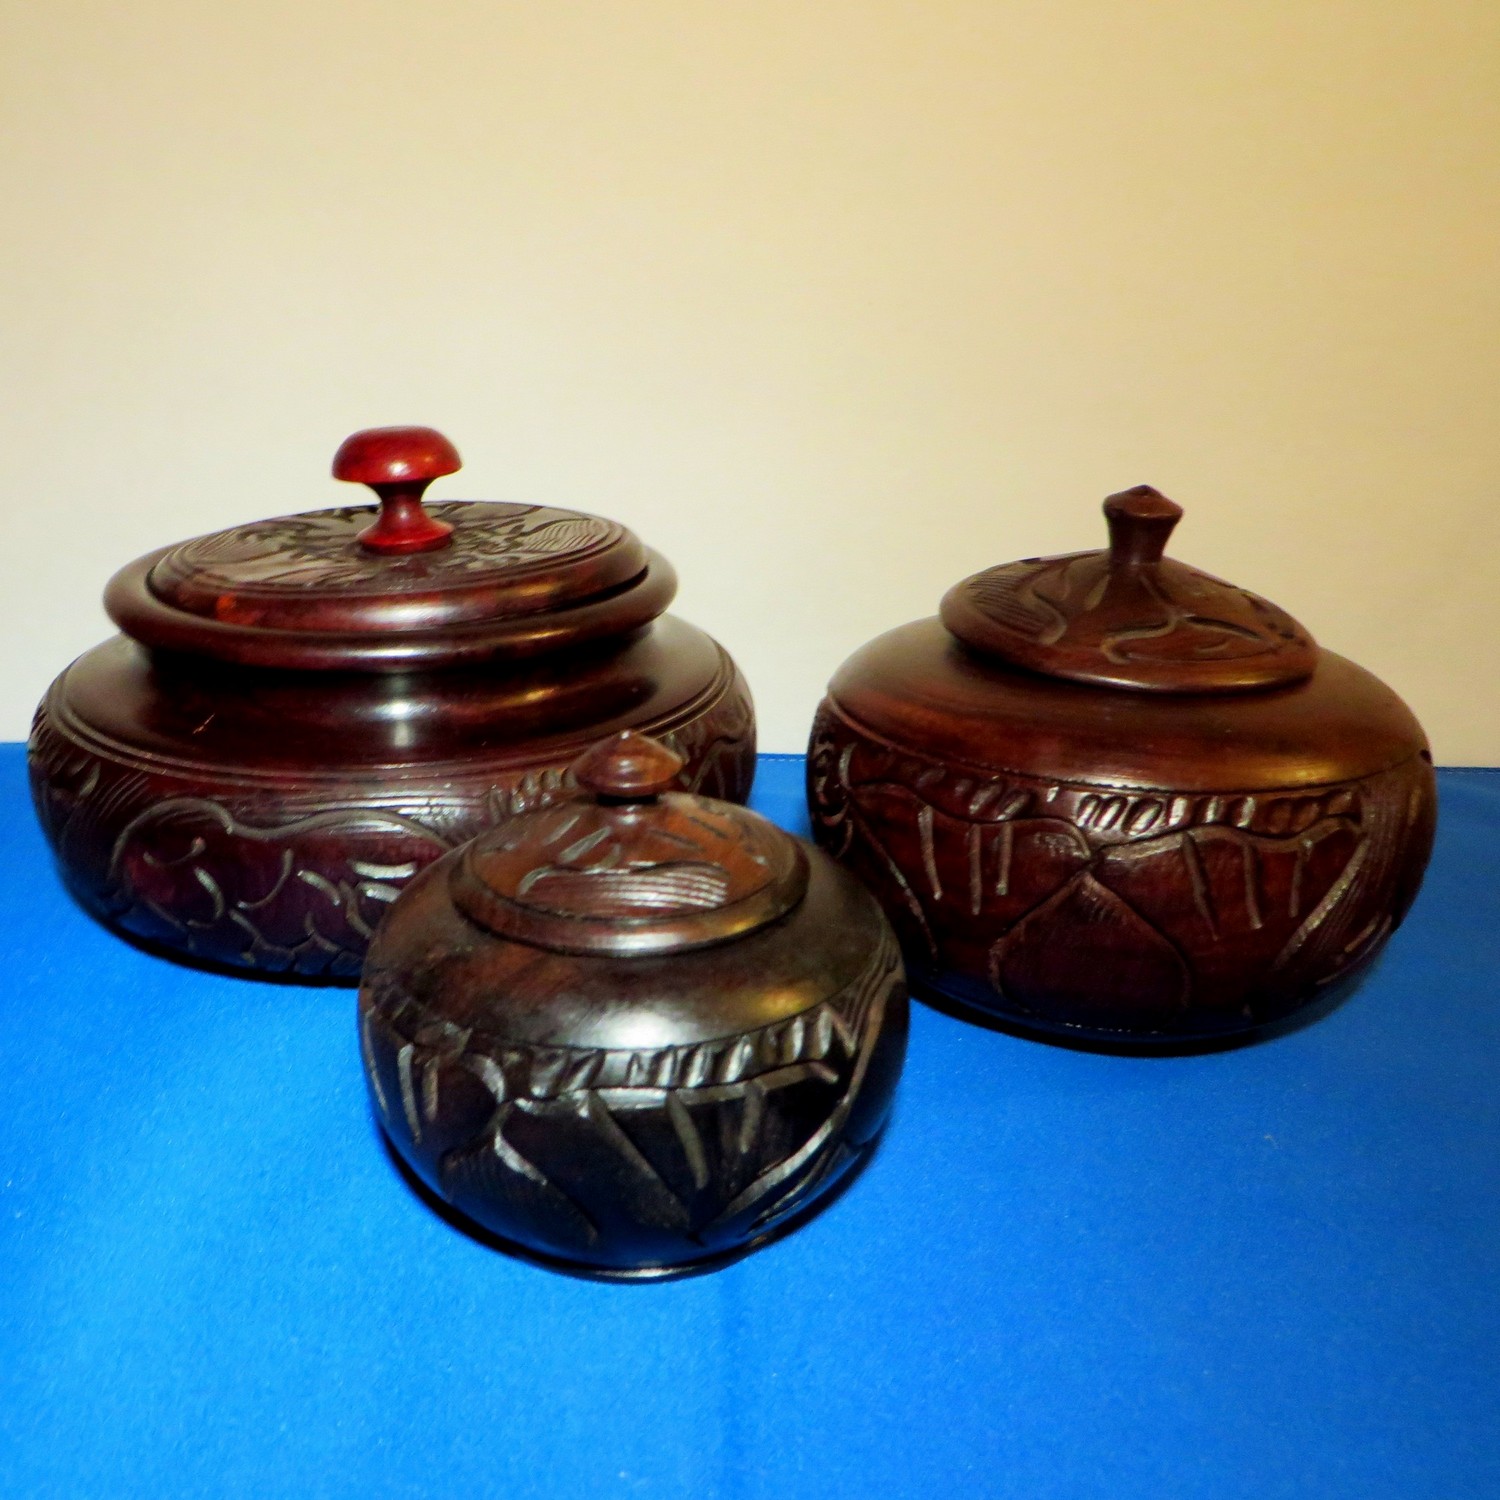 Small Hand Carved Wood Bowl With Lid, Carved Wooden Bowl With Lid